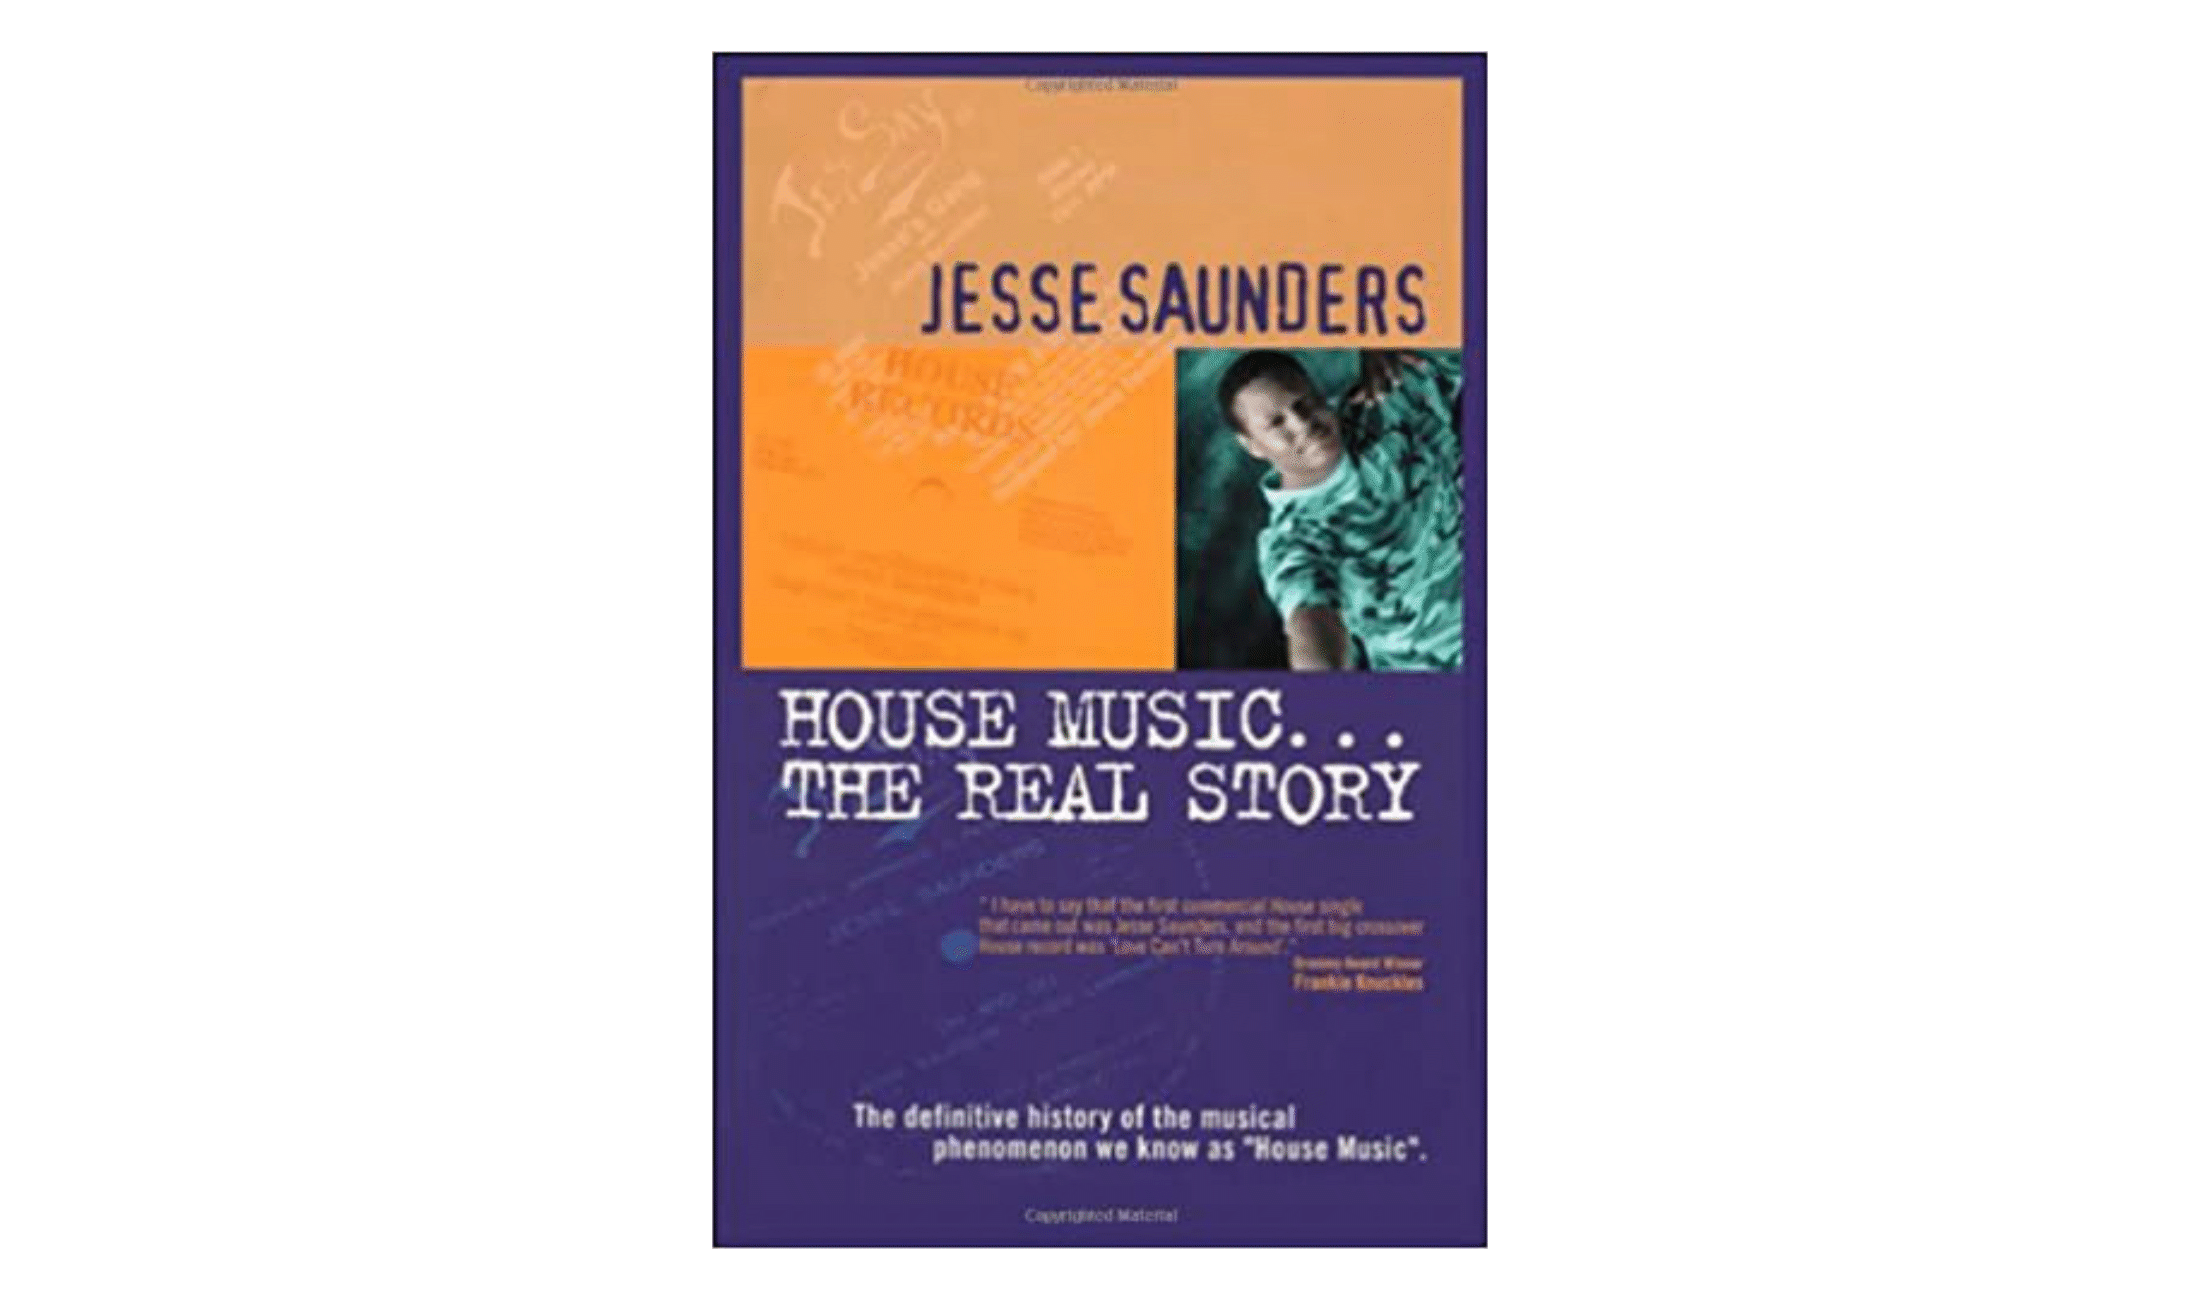 House Music… The Real Story von Jesse Saunders.